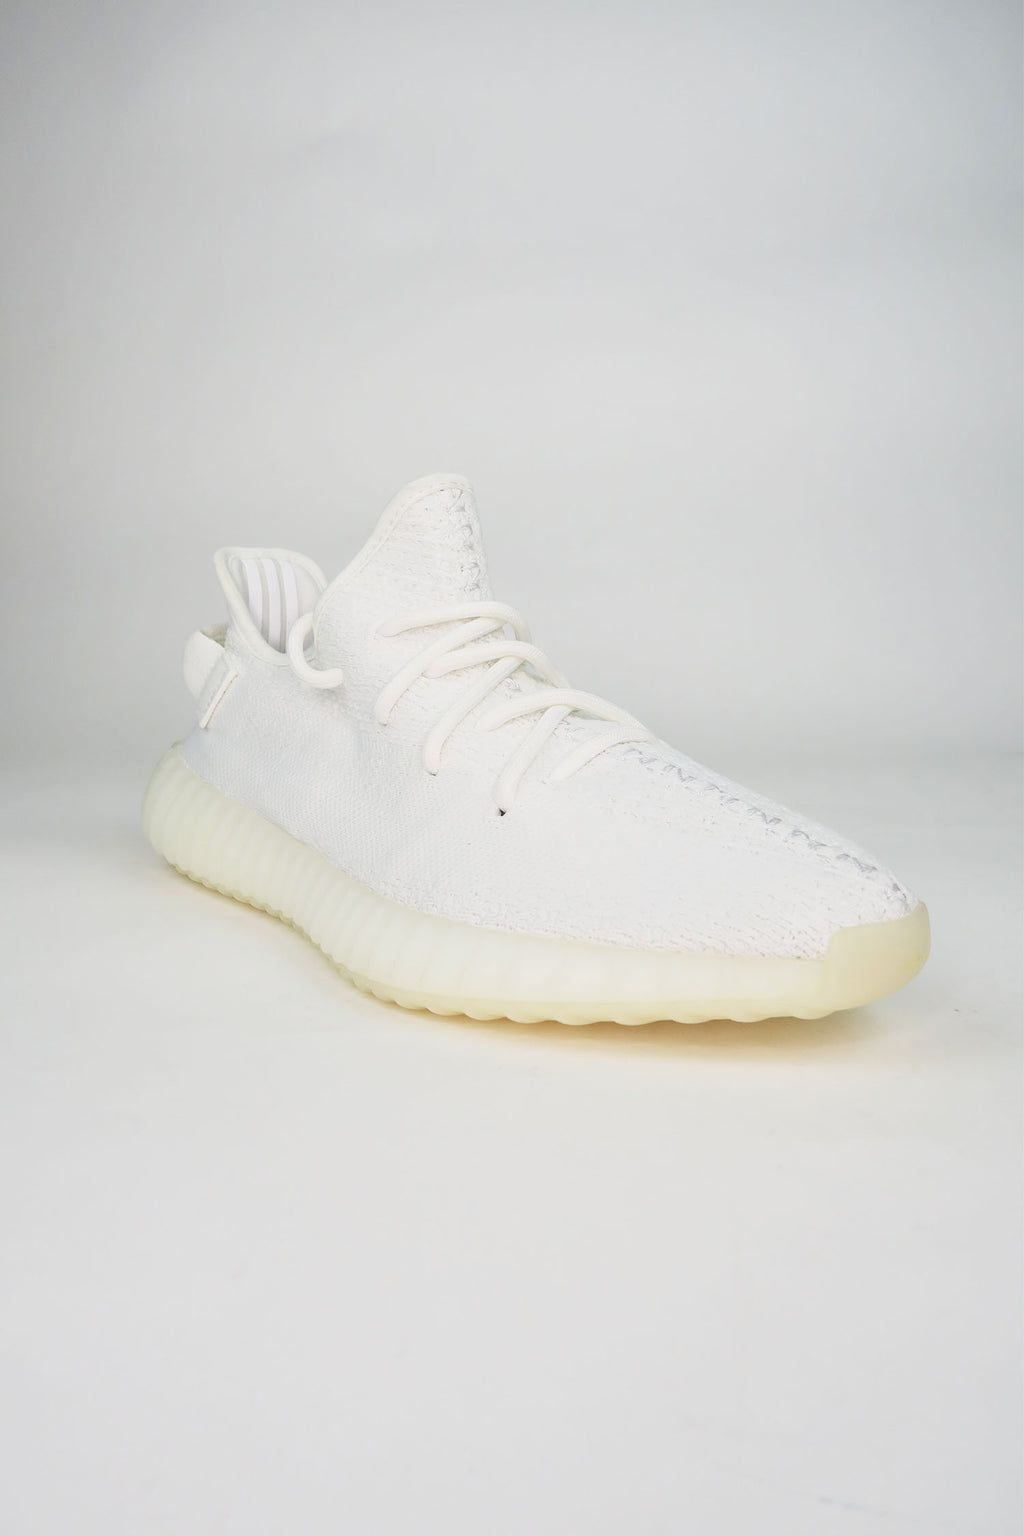 Yeezy x adidas Boost 350 V2 Cream White Low Top Sneakers sz 8